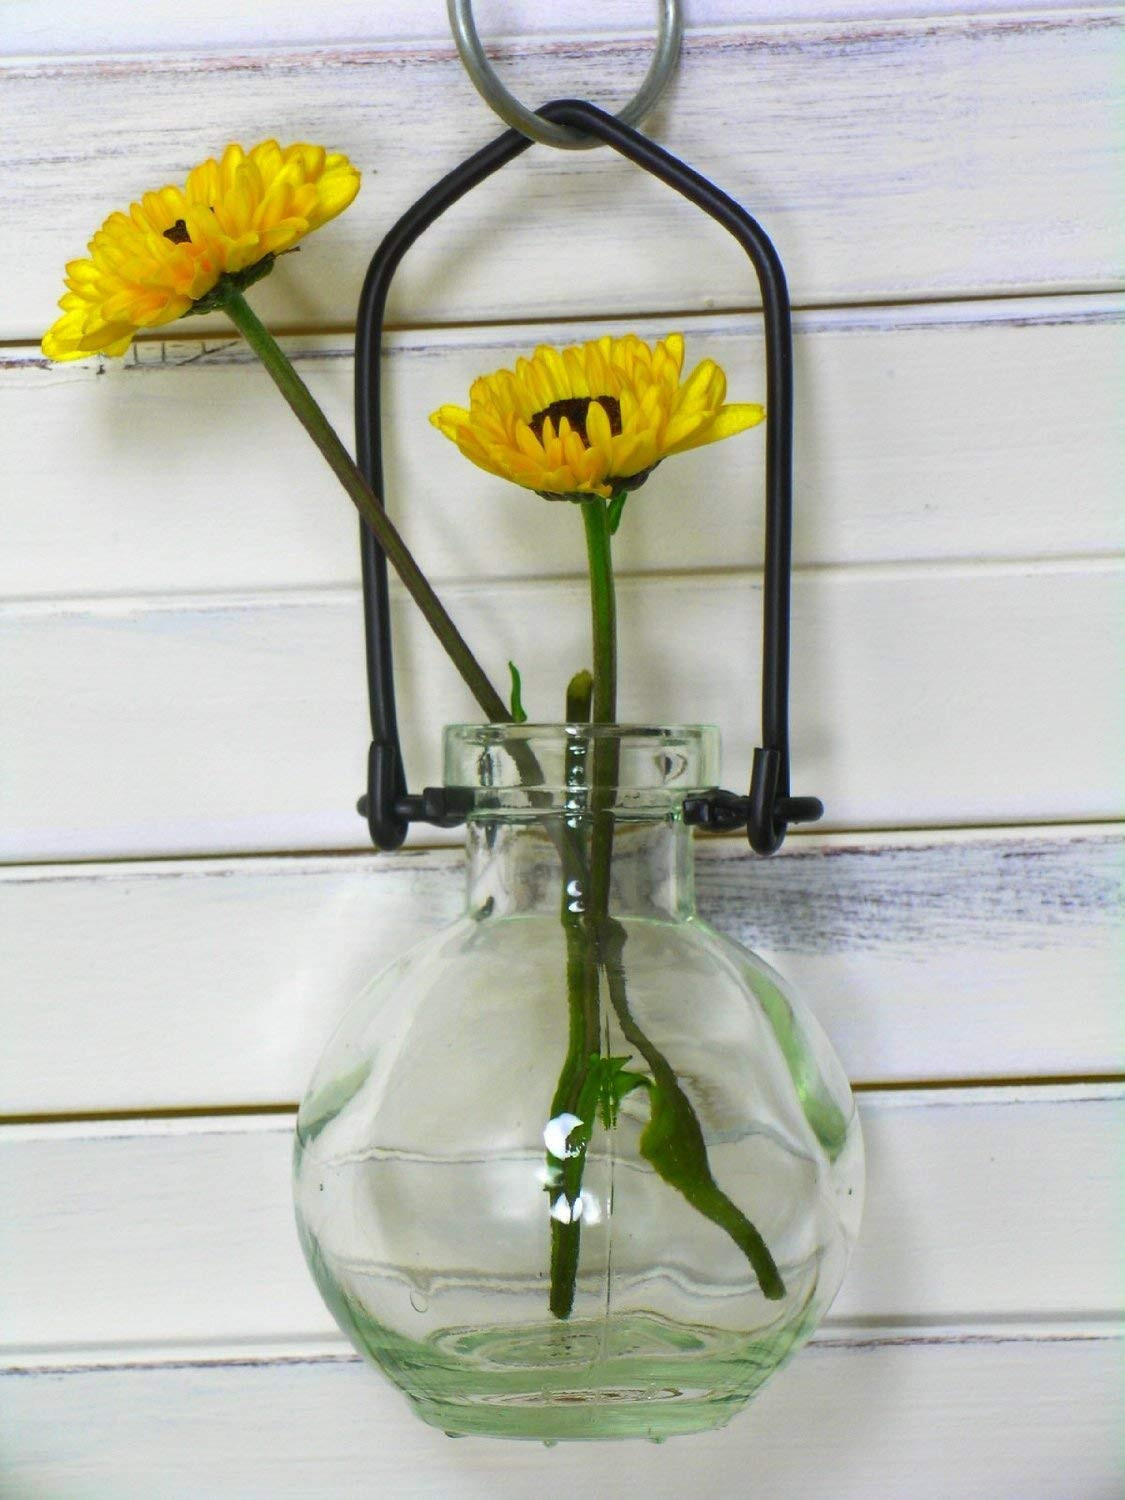 18 Lovely Blue Recycled Glass Vase 2024 free download blue recycled glass vase of amazon com hanging flowers colored glass vase g70 clear 1 pc intended for amazon com hanging flowers colored glass vase g70 clear 1 pc colored glass bottle floral